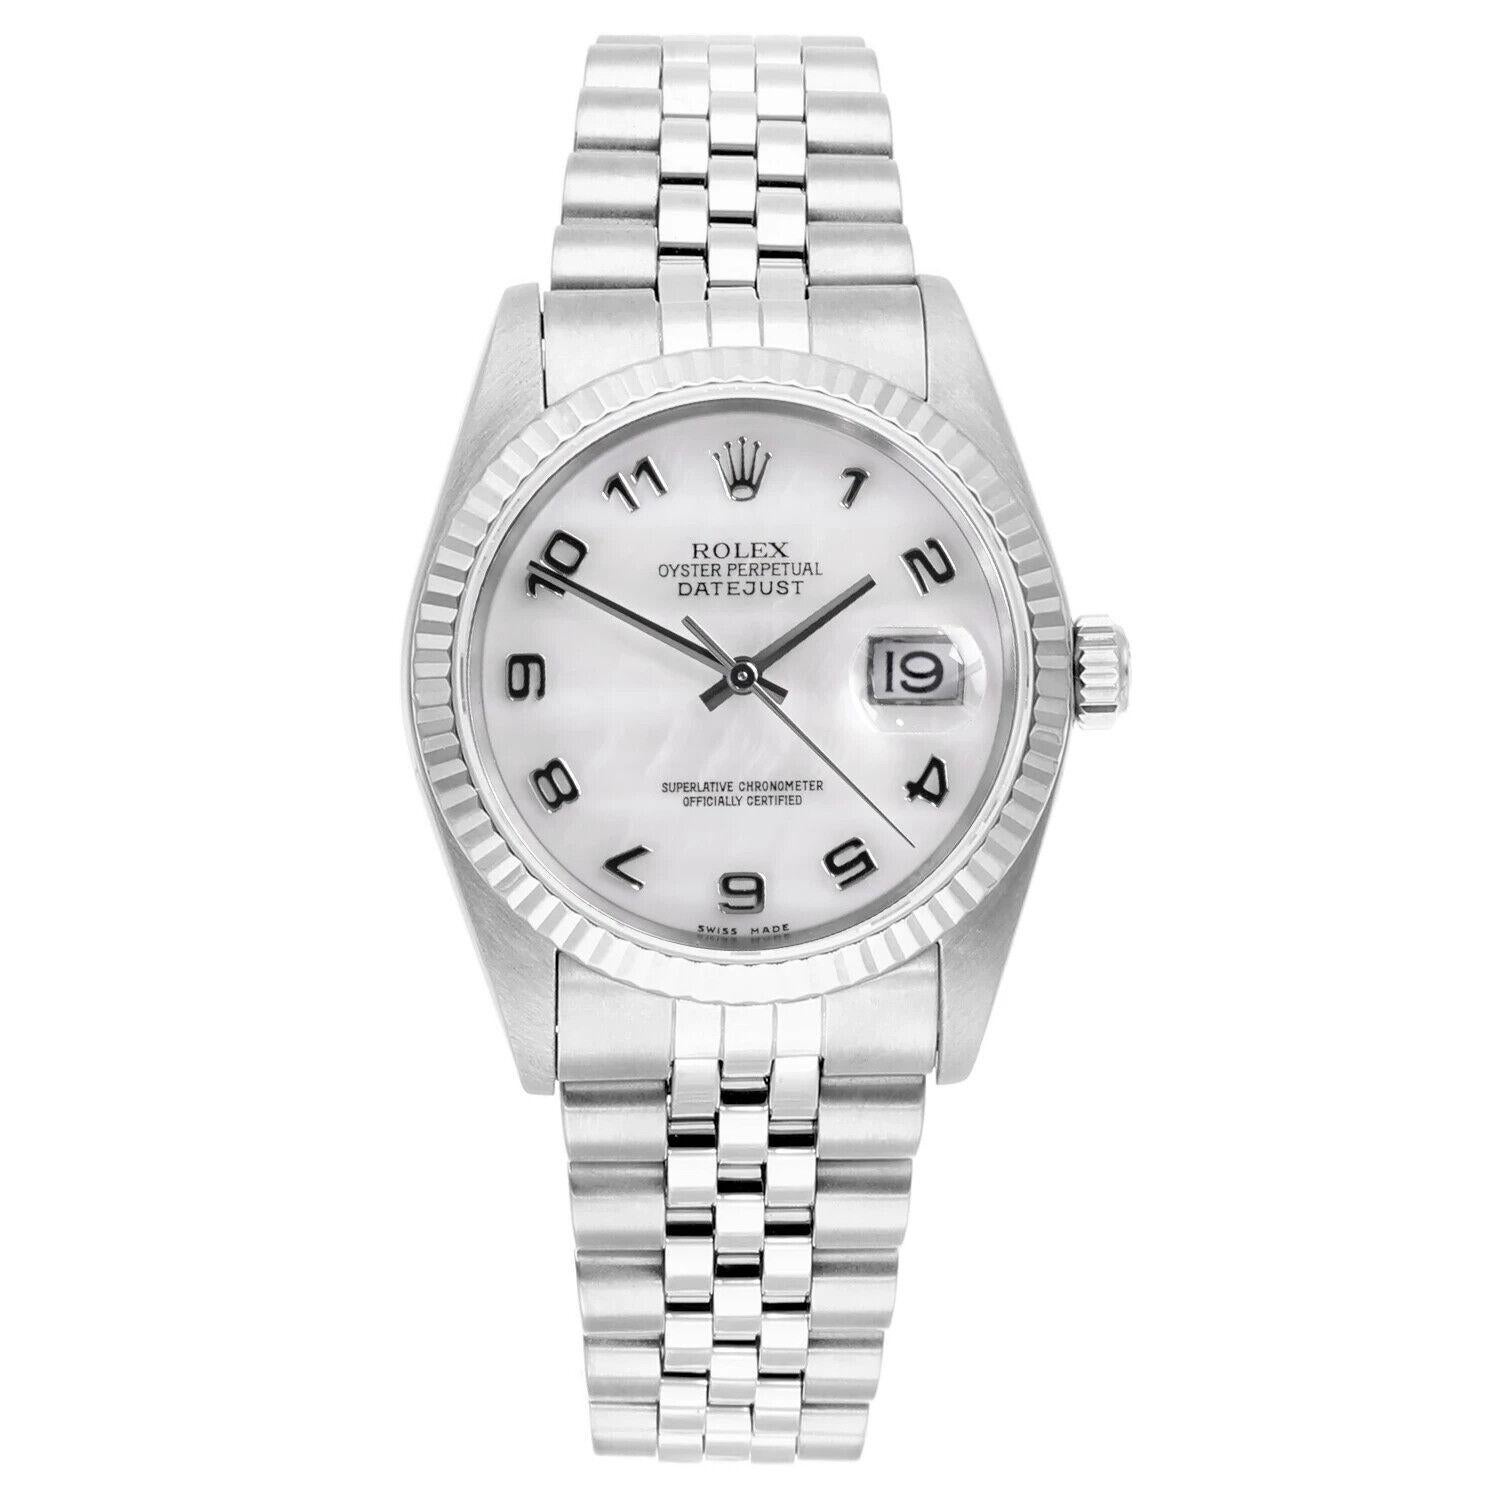 Silver-tone stainless steel case with a silver-tone stainless steel jubilee bracelet. Fixed 18kt white gold bezel. White mother of pearl dial with silver-tone hands and Roman numeral hour markers. Minute markers around the outer rim. Dial Type: